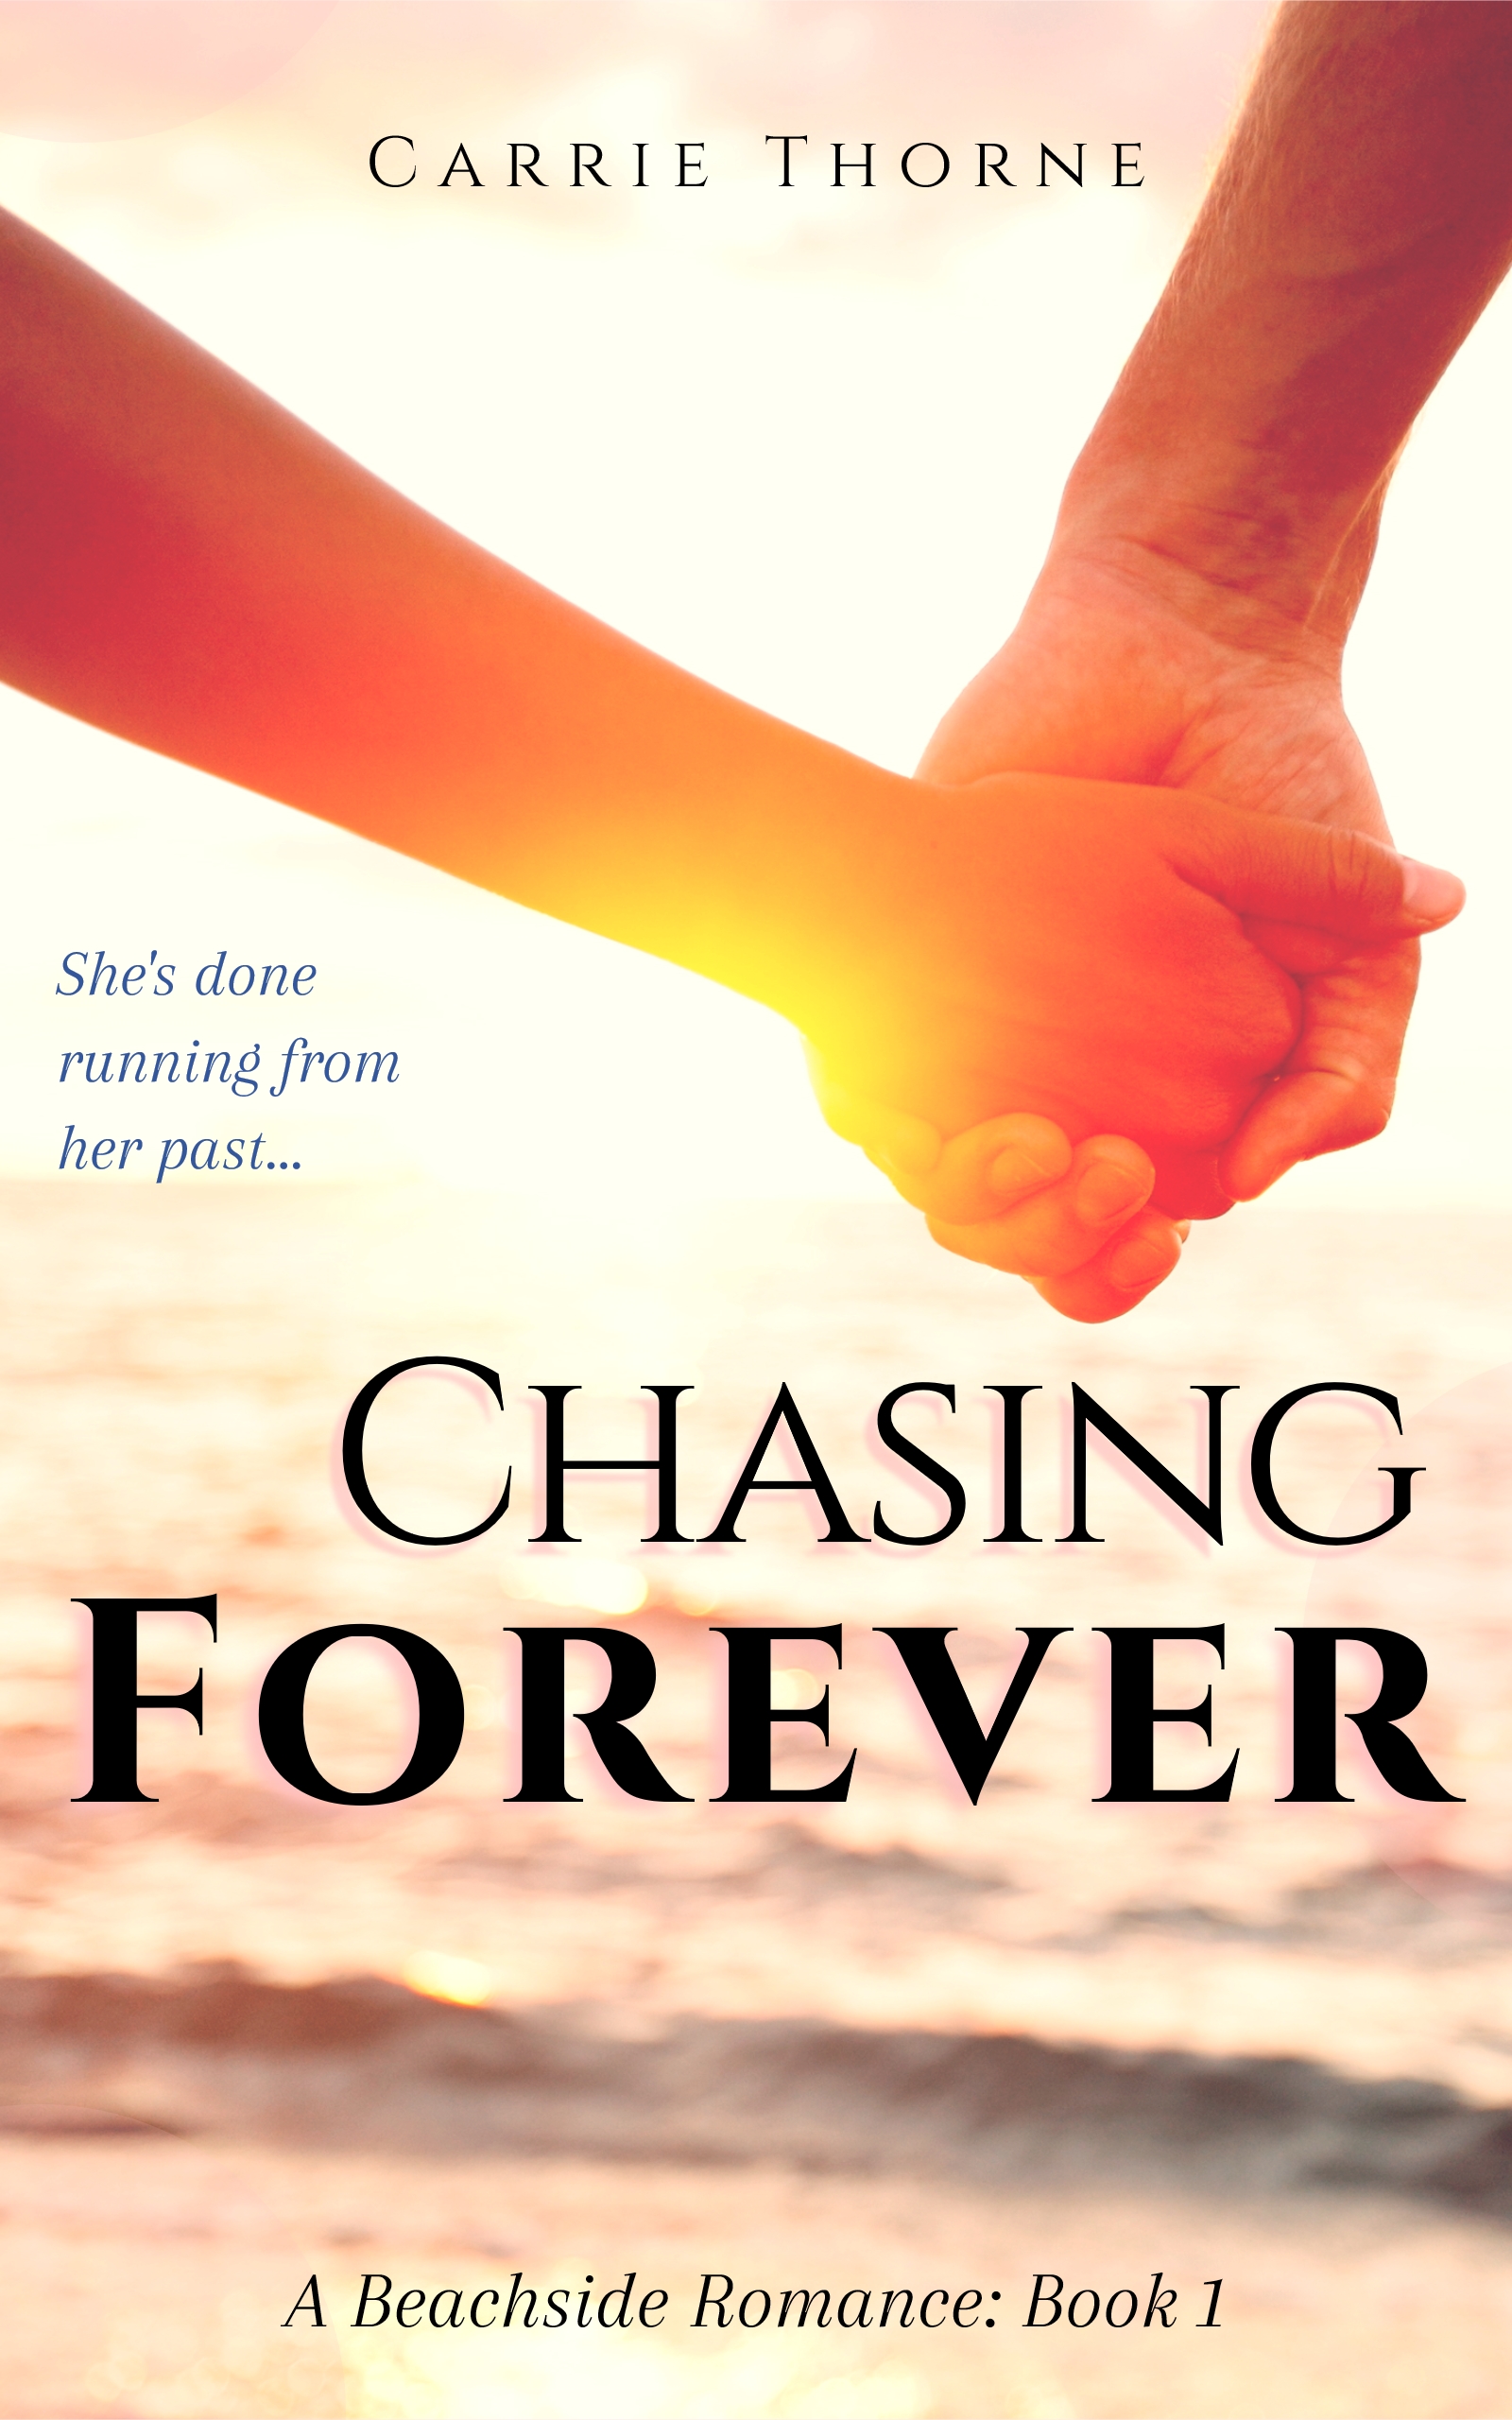 Chasing Forever: A Beachside Romance, Book 1 by Carrie Thorne